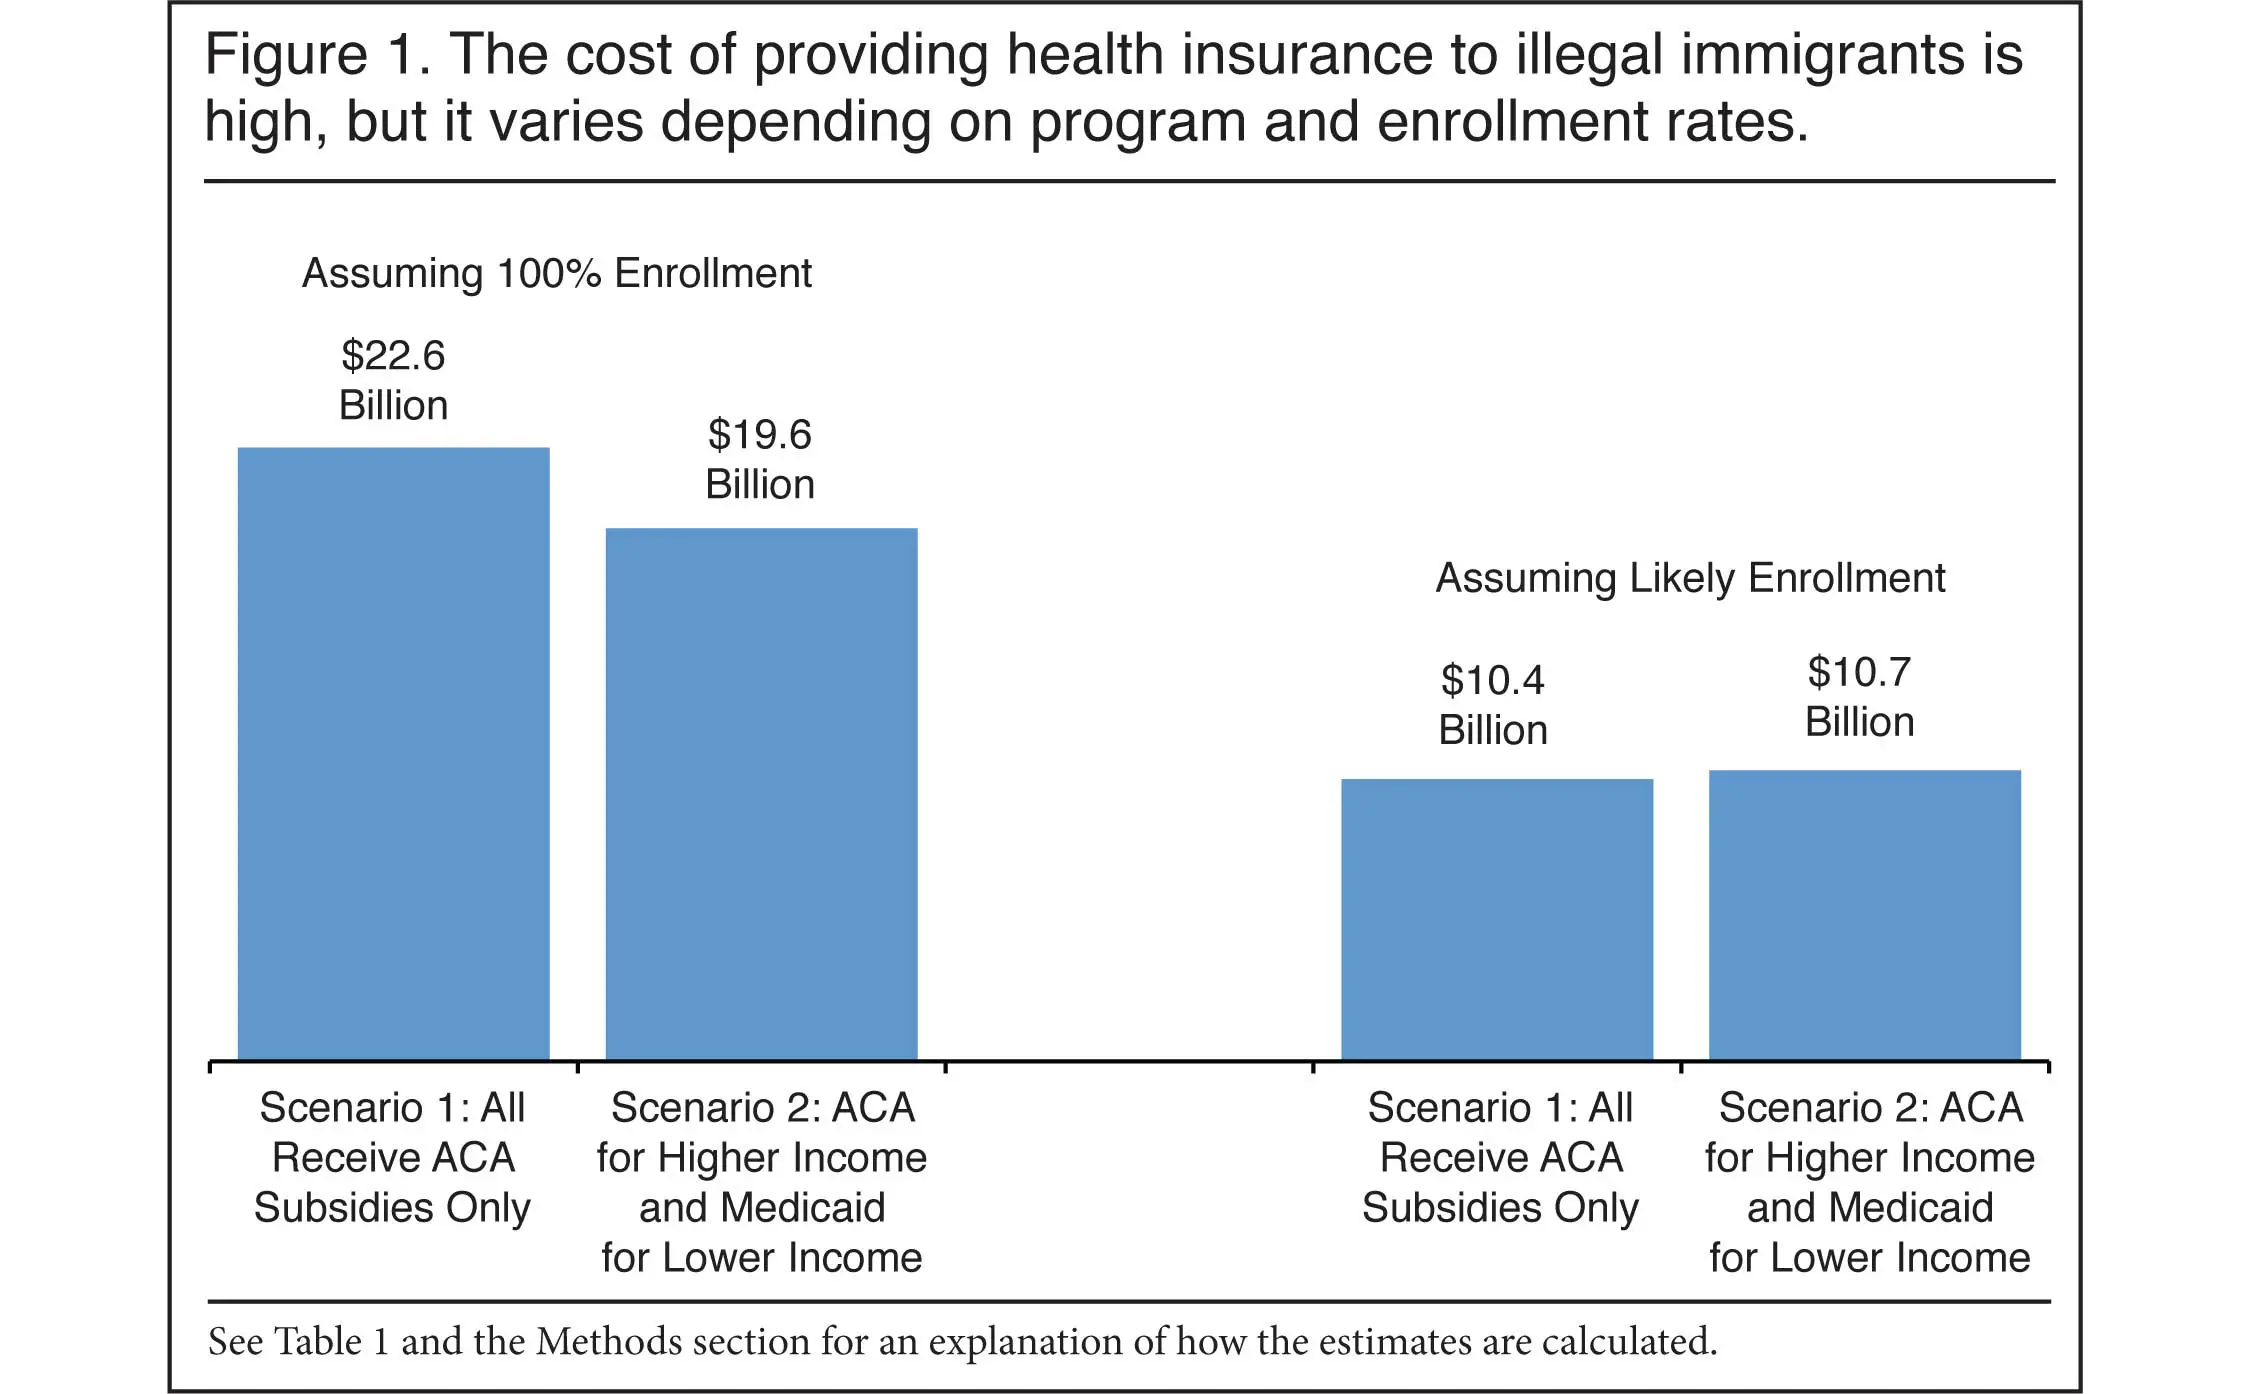 How Much Would It Cost to Provide Health Insurance to Illegal Immigrants?